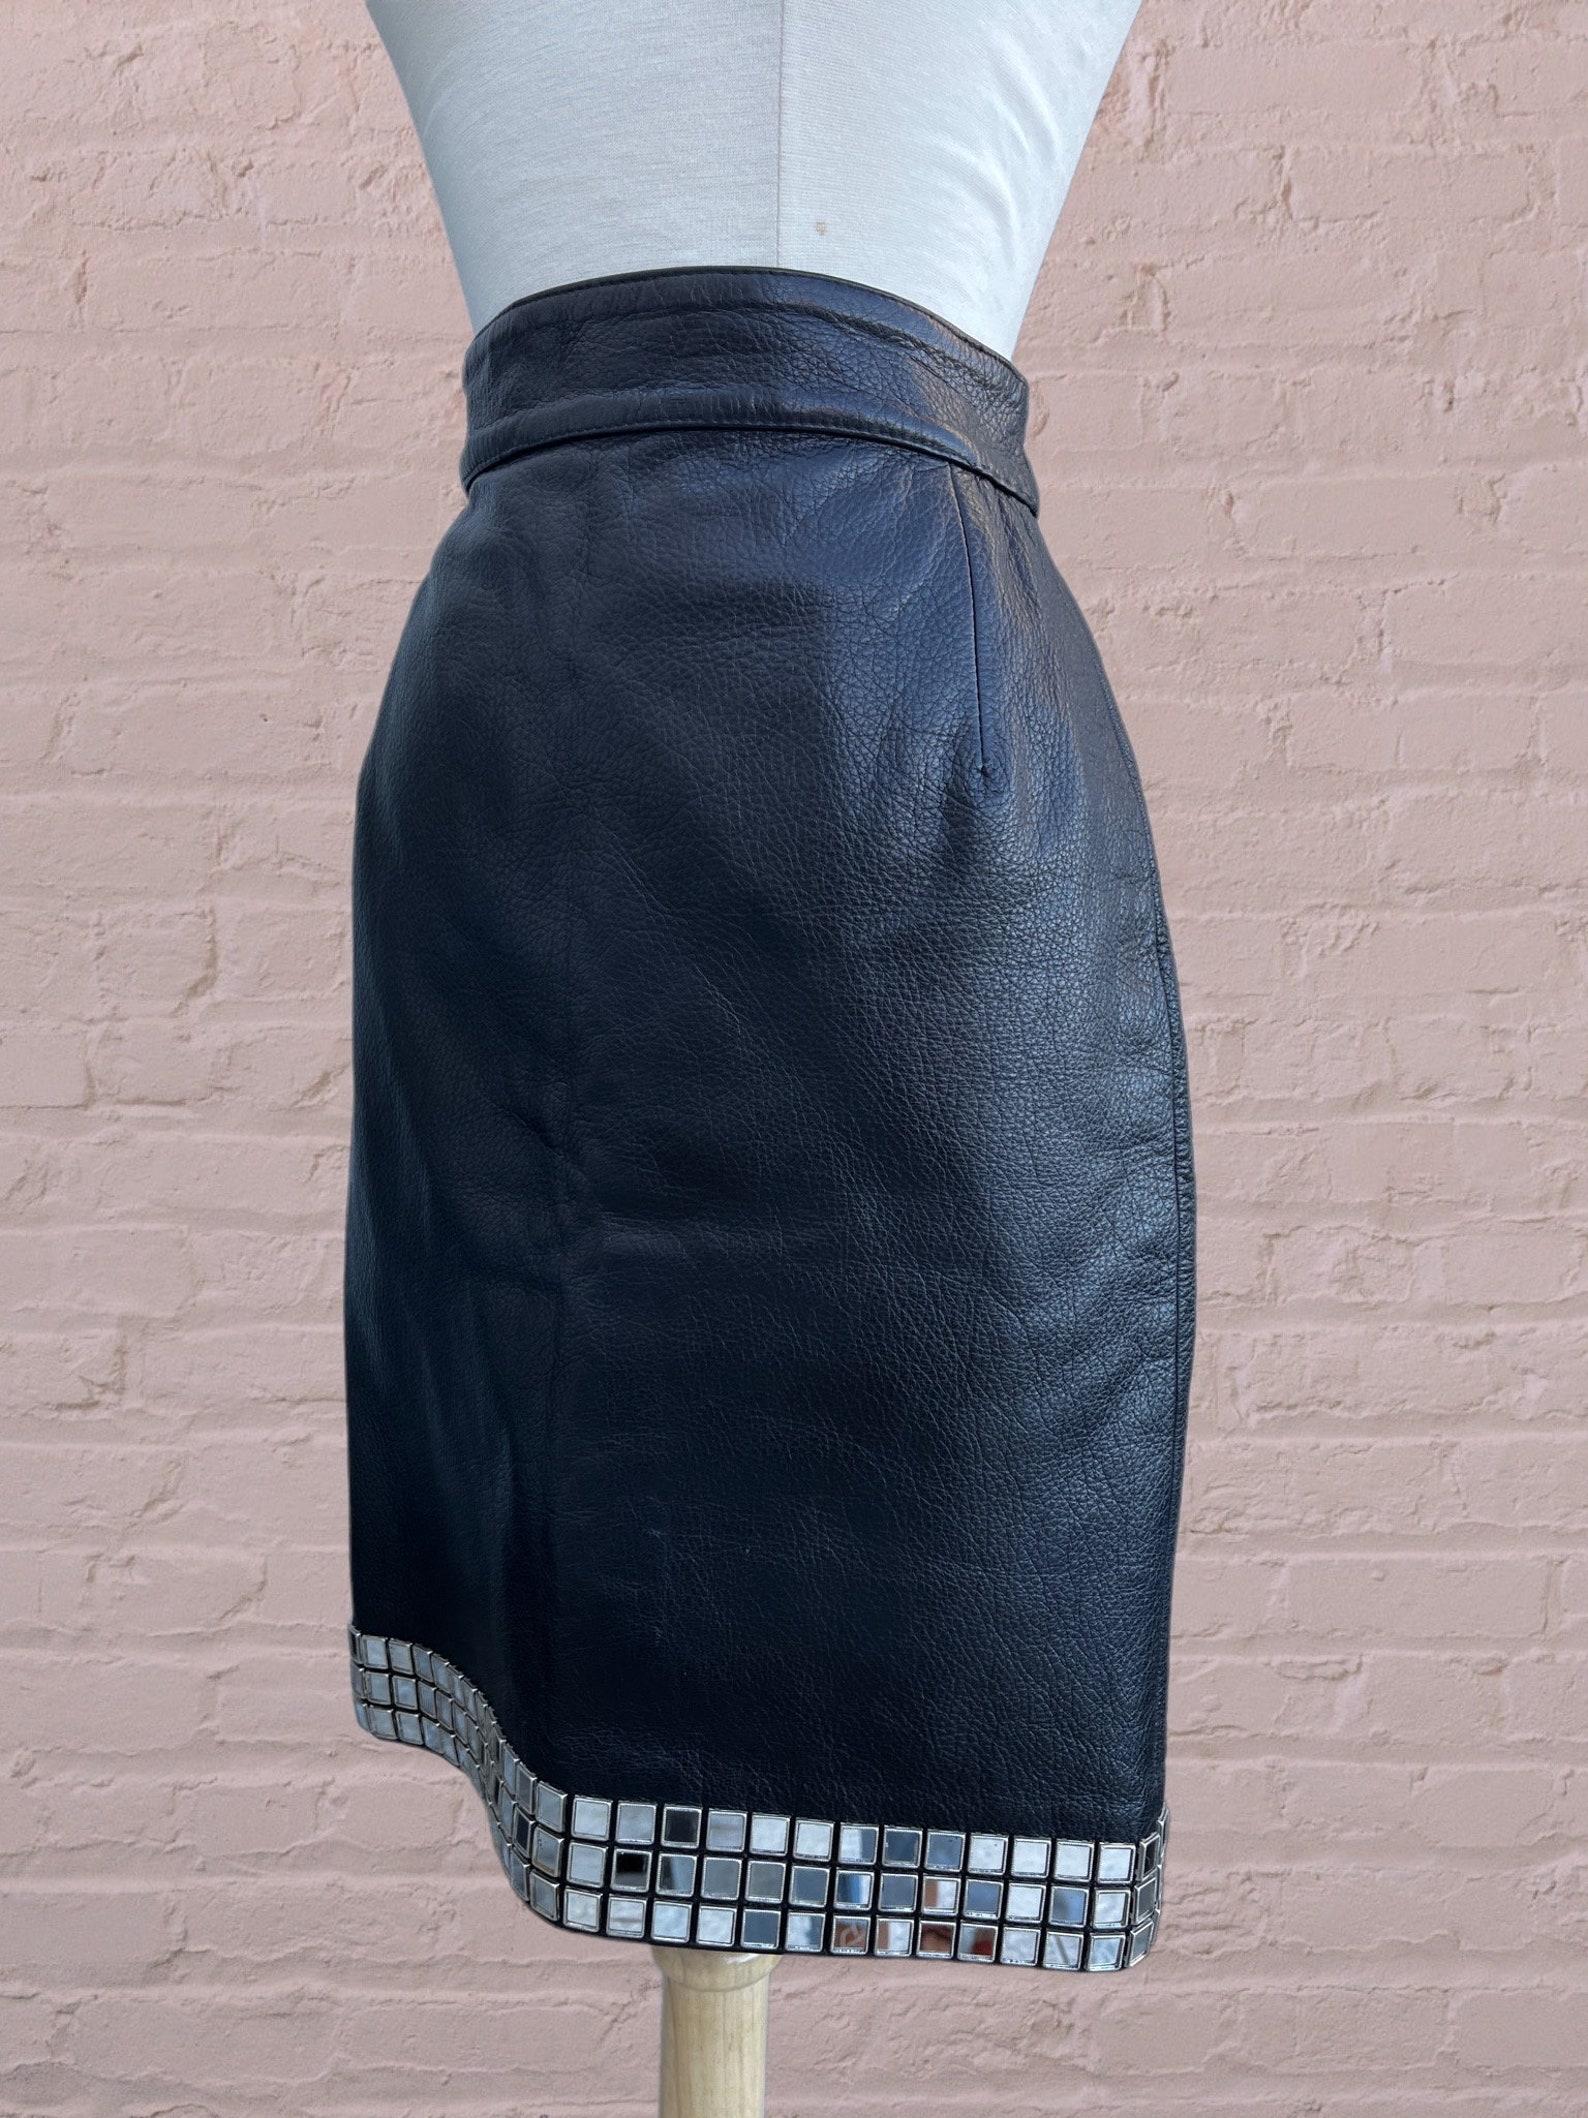 Moschino black leather mirror skirt For Sale 1